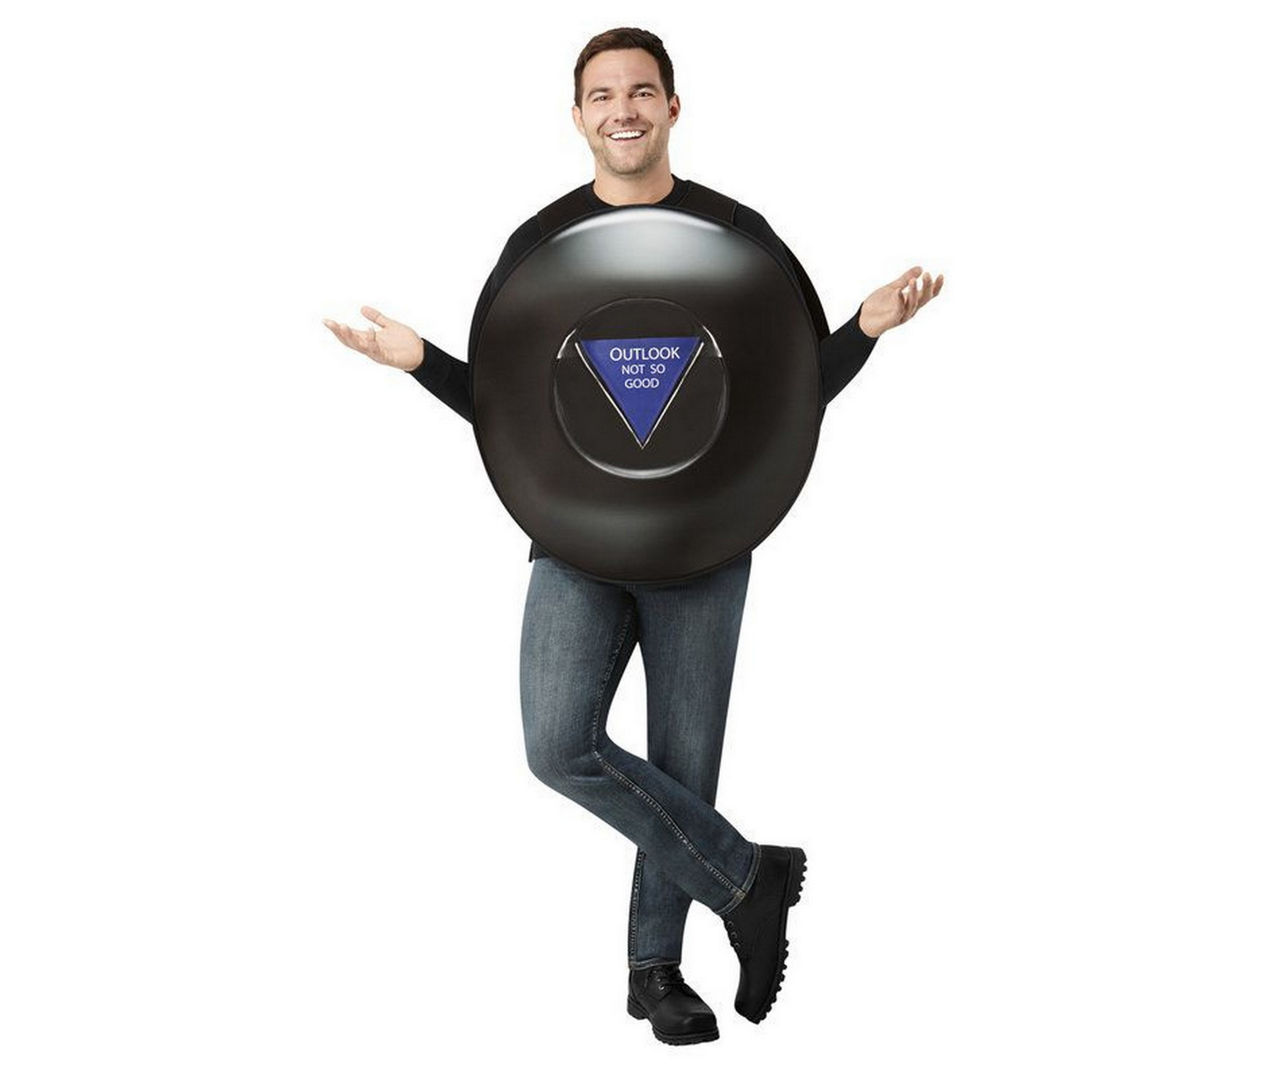 Rubies Mattel Games: Magic 8 Ball Child Costume One Size Fits Most